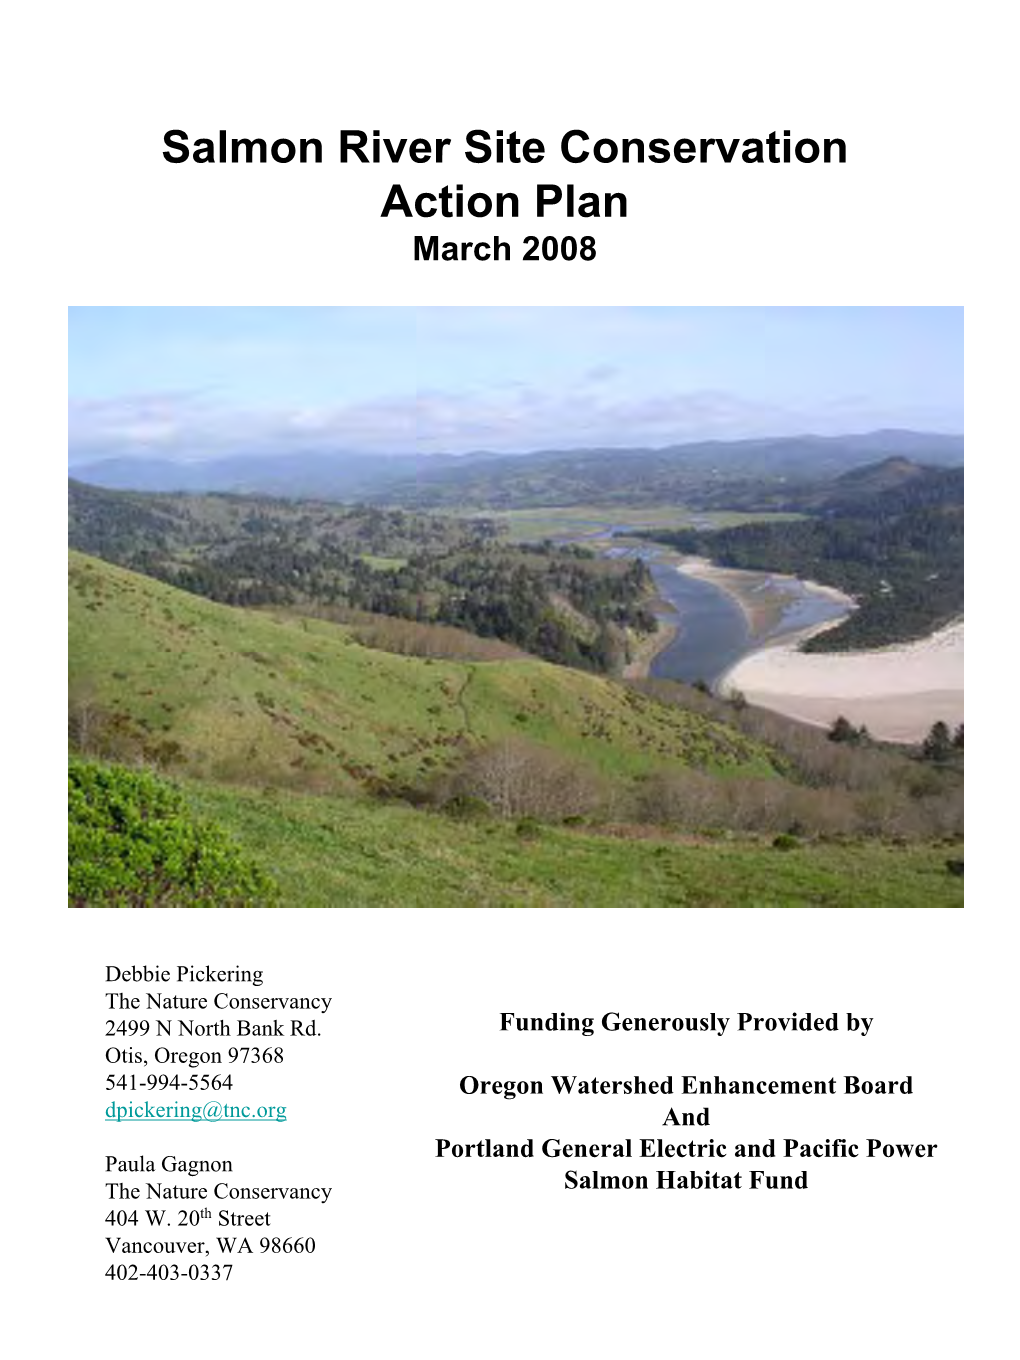 Salmon River Conservation Action Plan